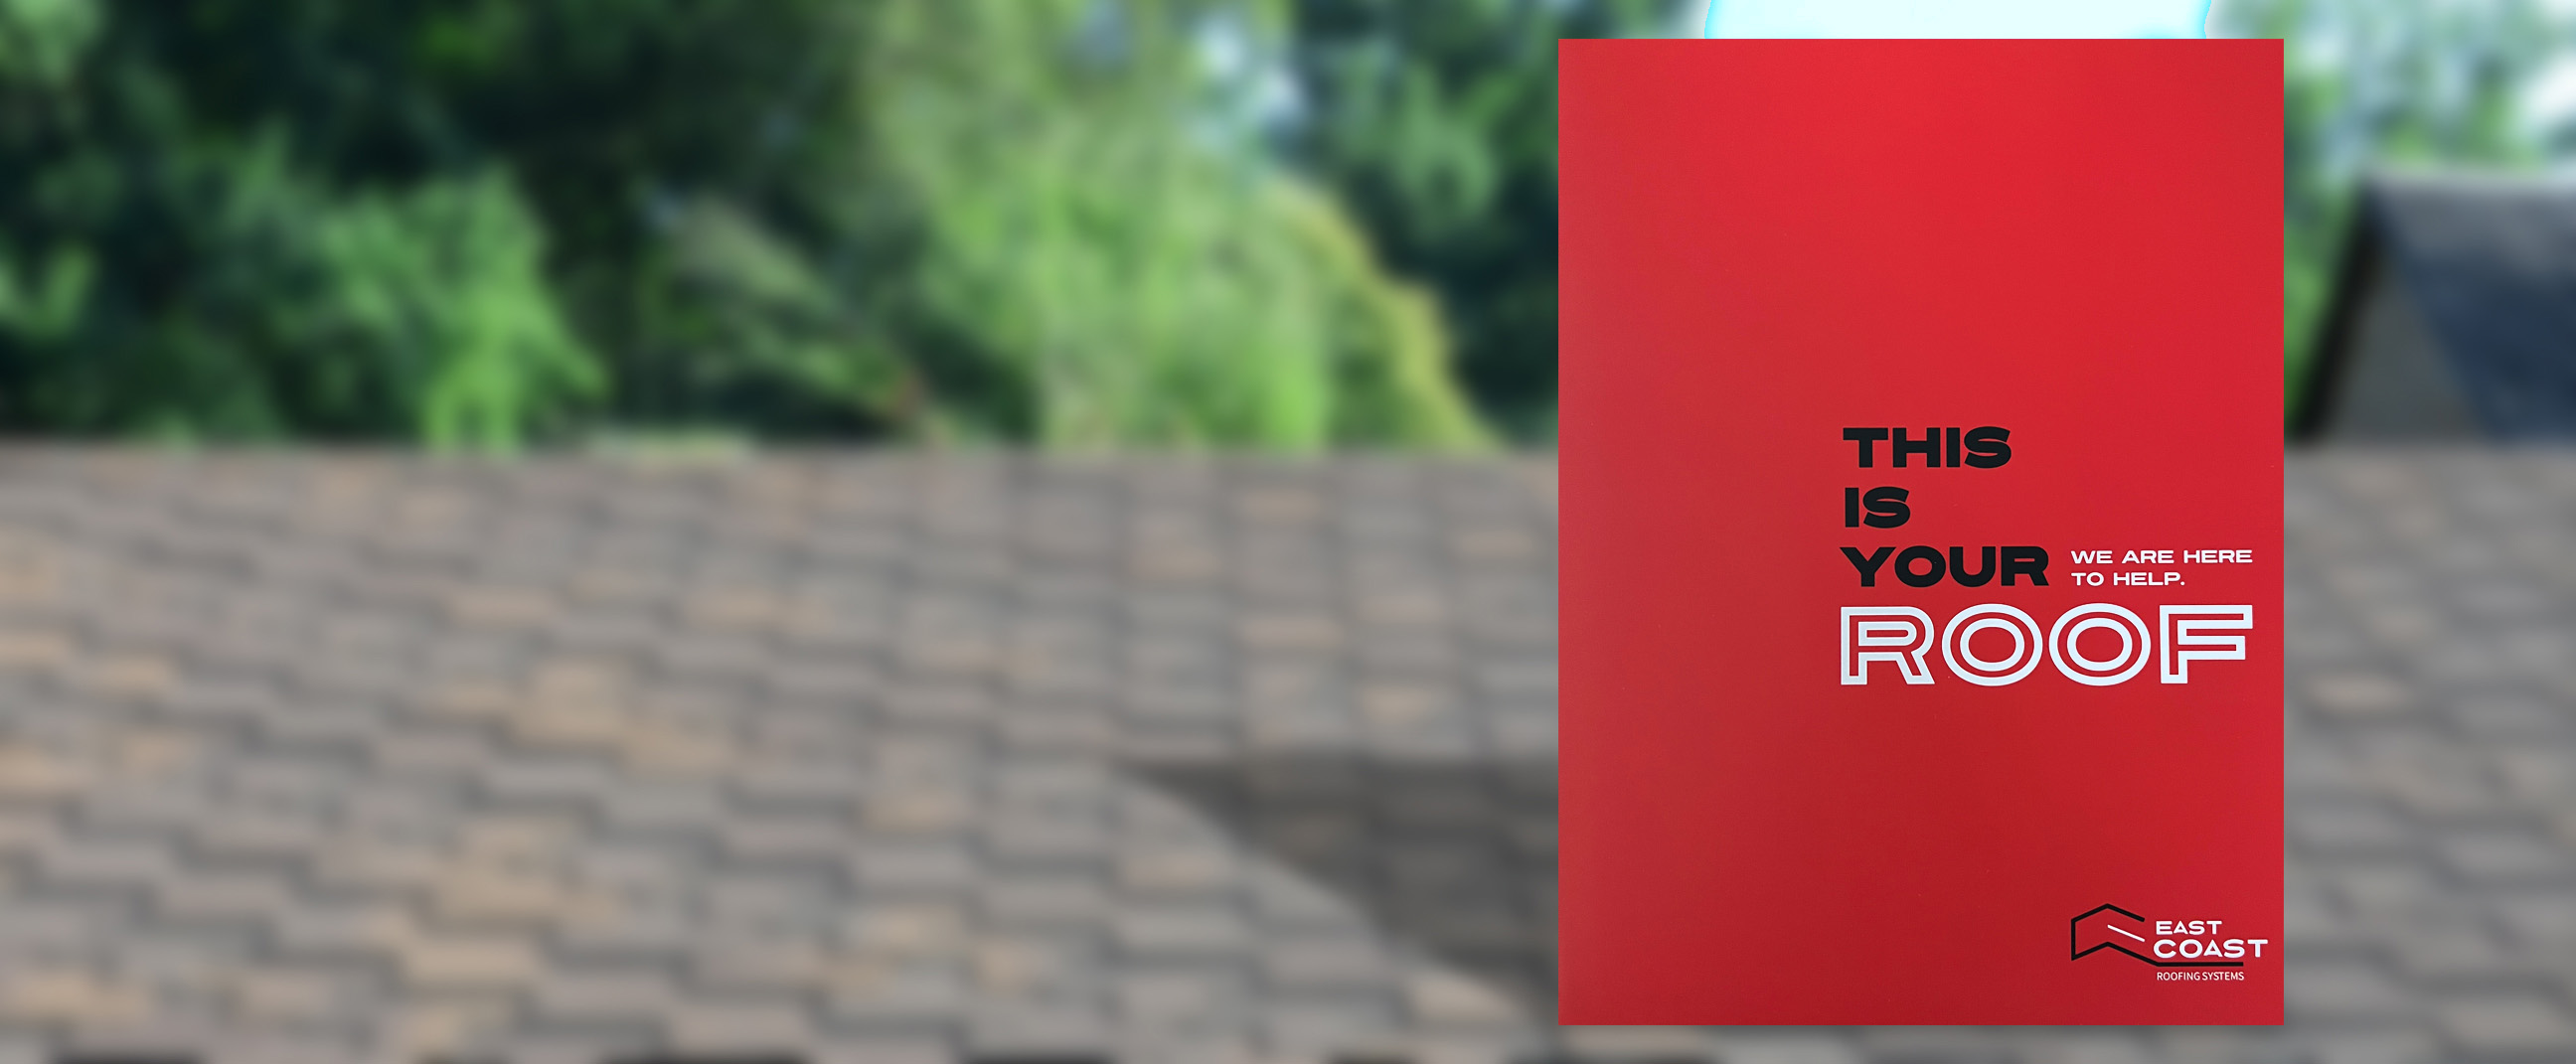 Composite image of East Coast Roofing Systems' presentation folder superimposed on an image of roof shingles.